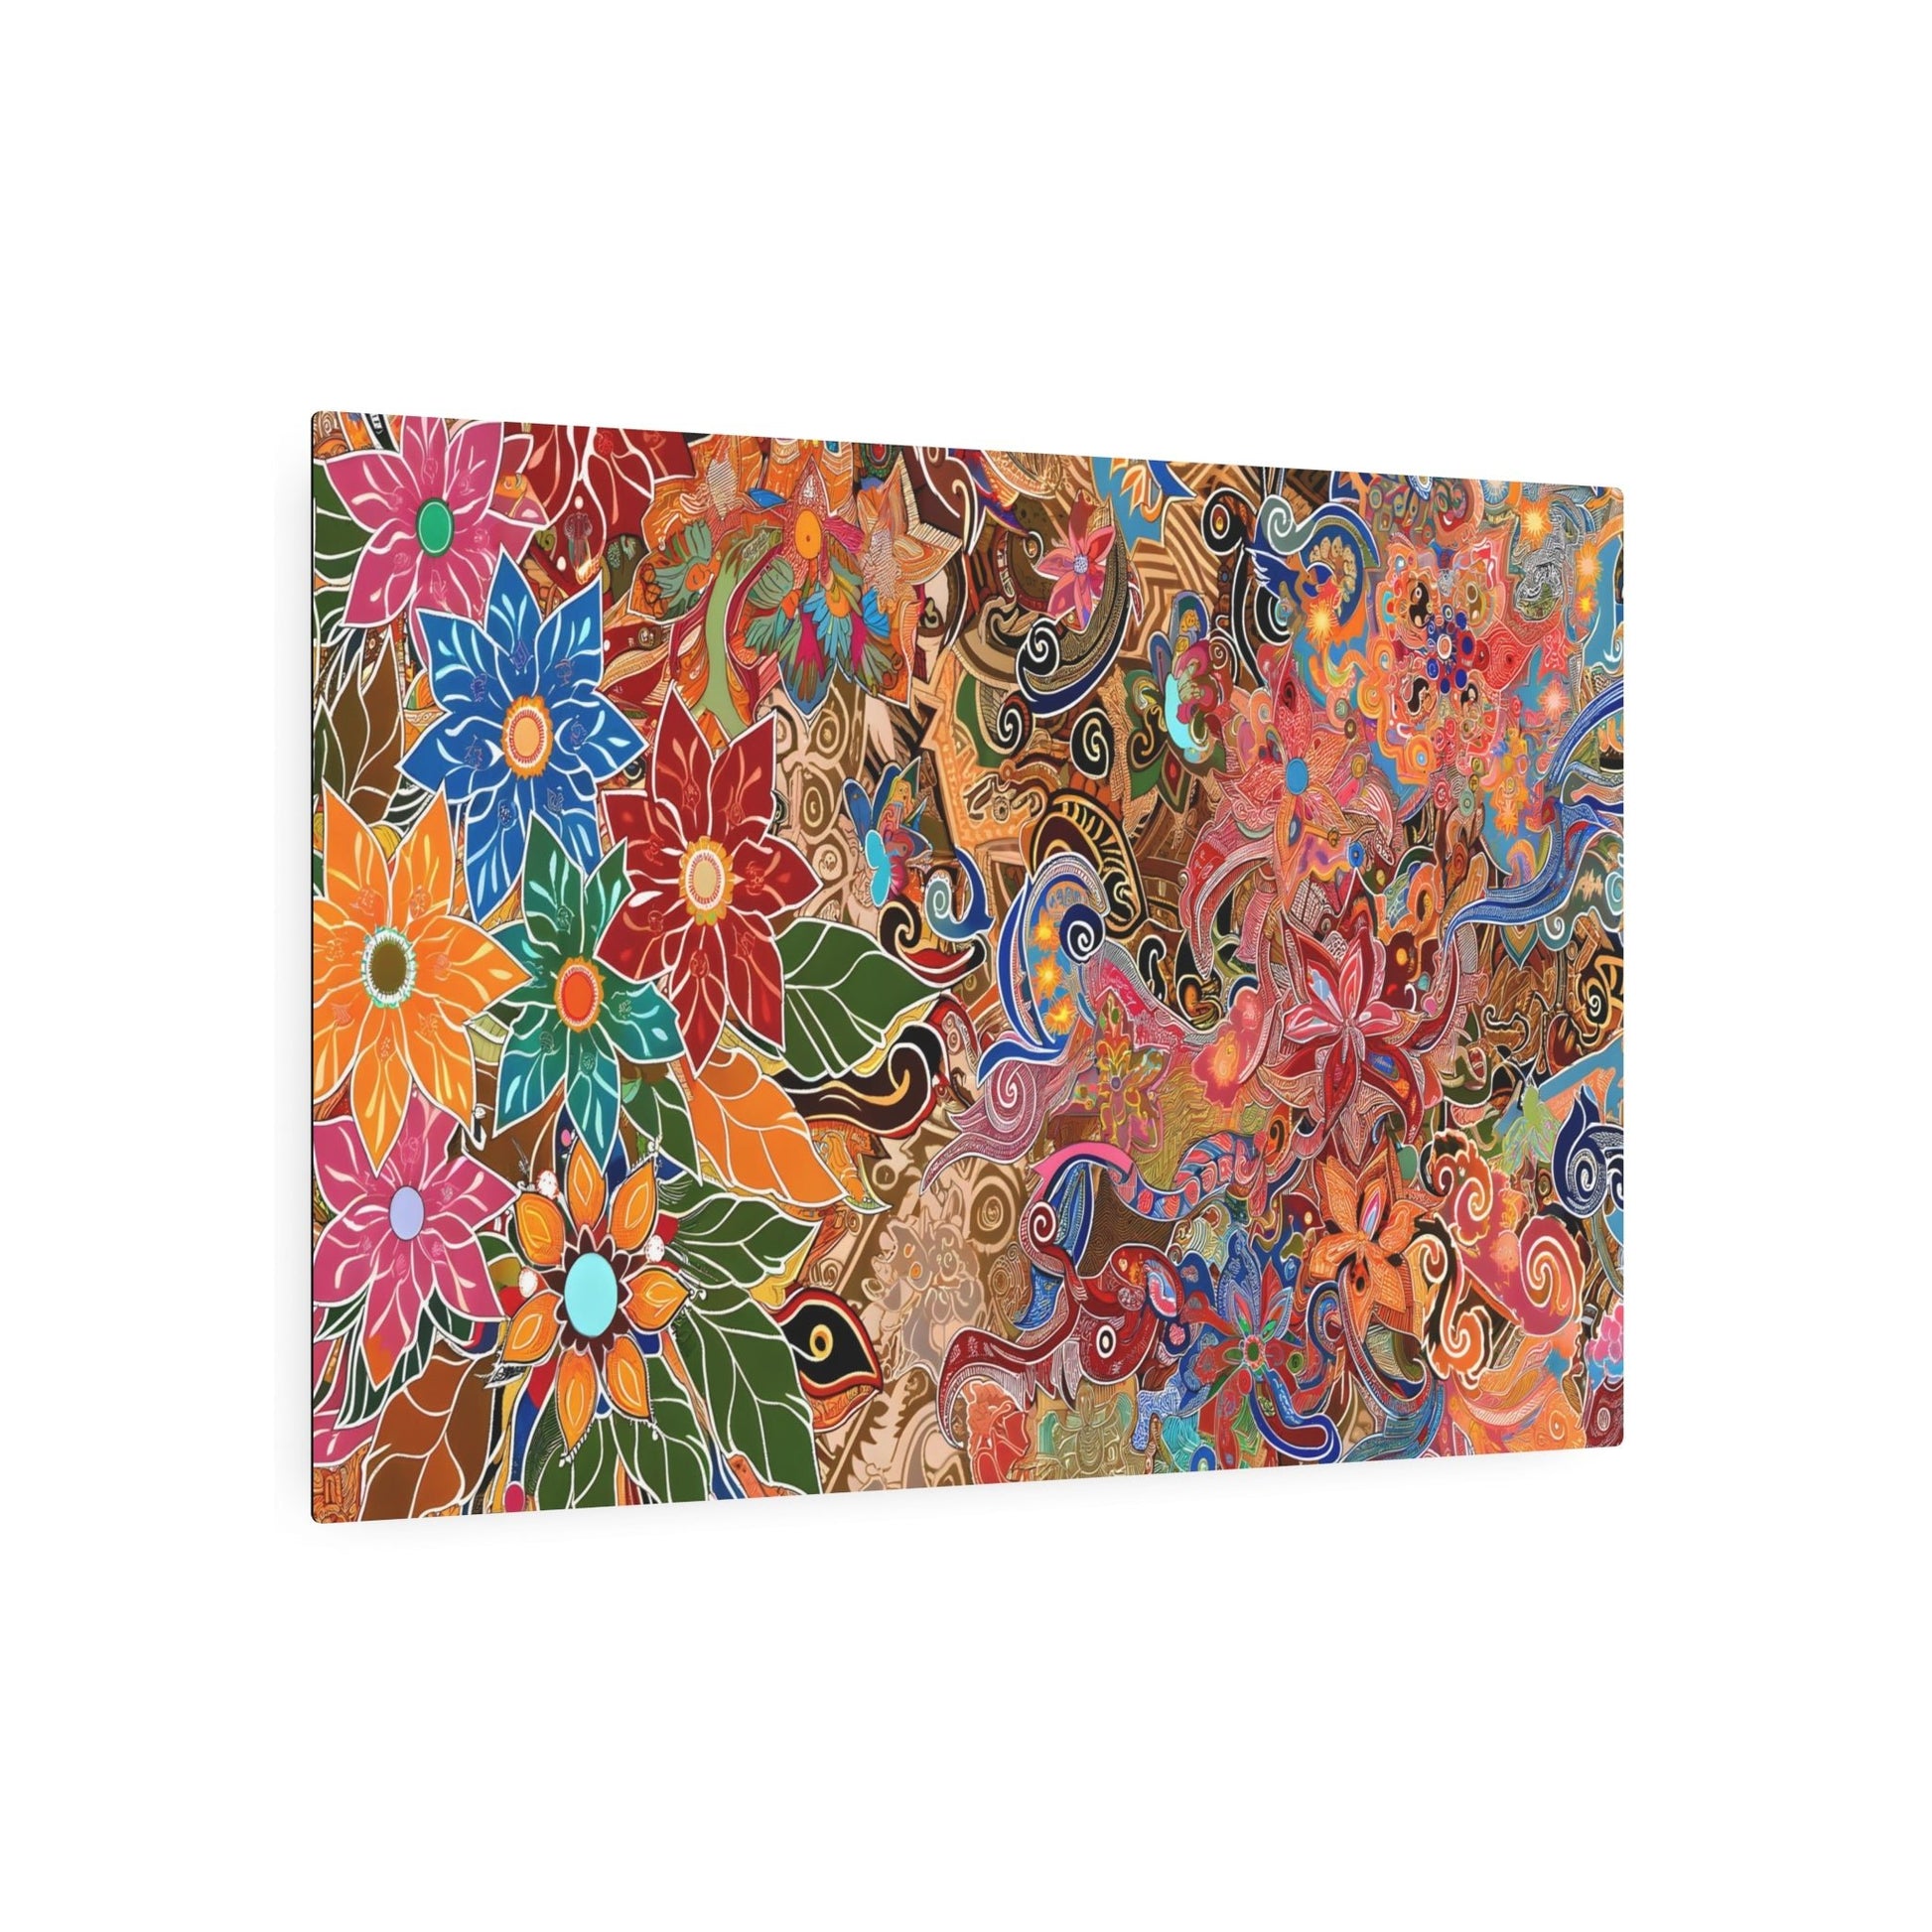 Metal Poster Art | "Indonesian Batik Artwork: Vibrant and Intricate Traditional Floral and Geometric Patterns - Non-Western & Global Styles Collection" - Metal Poster Art 36″ x 24″ (Horizontal) 0.12''